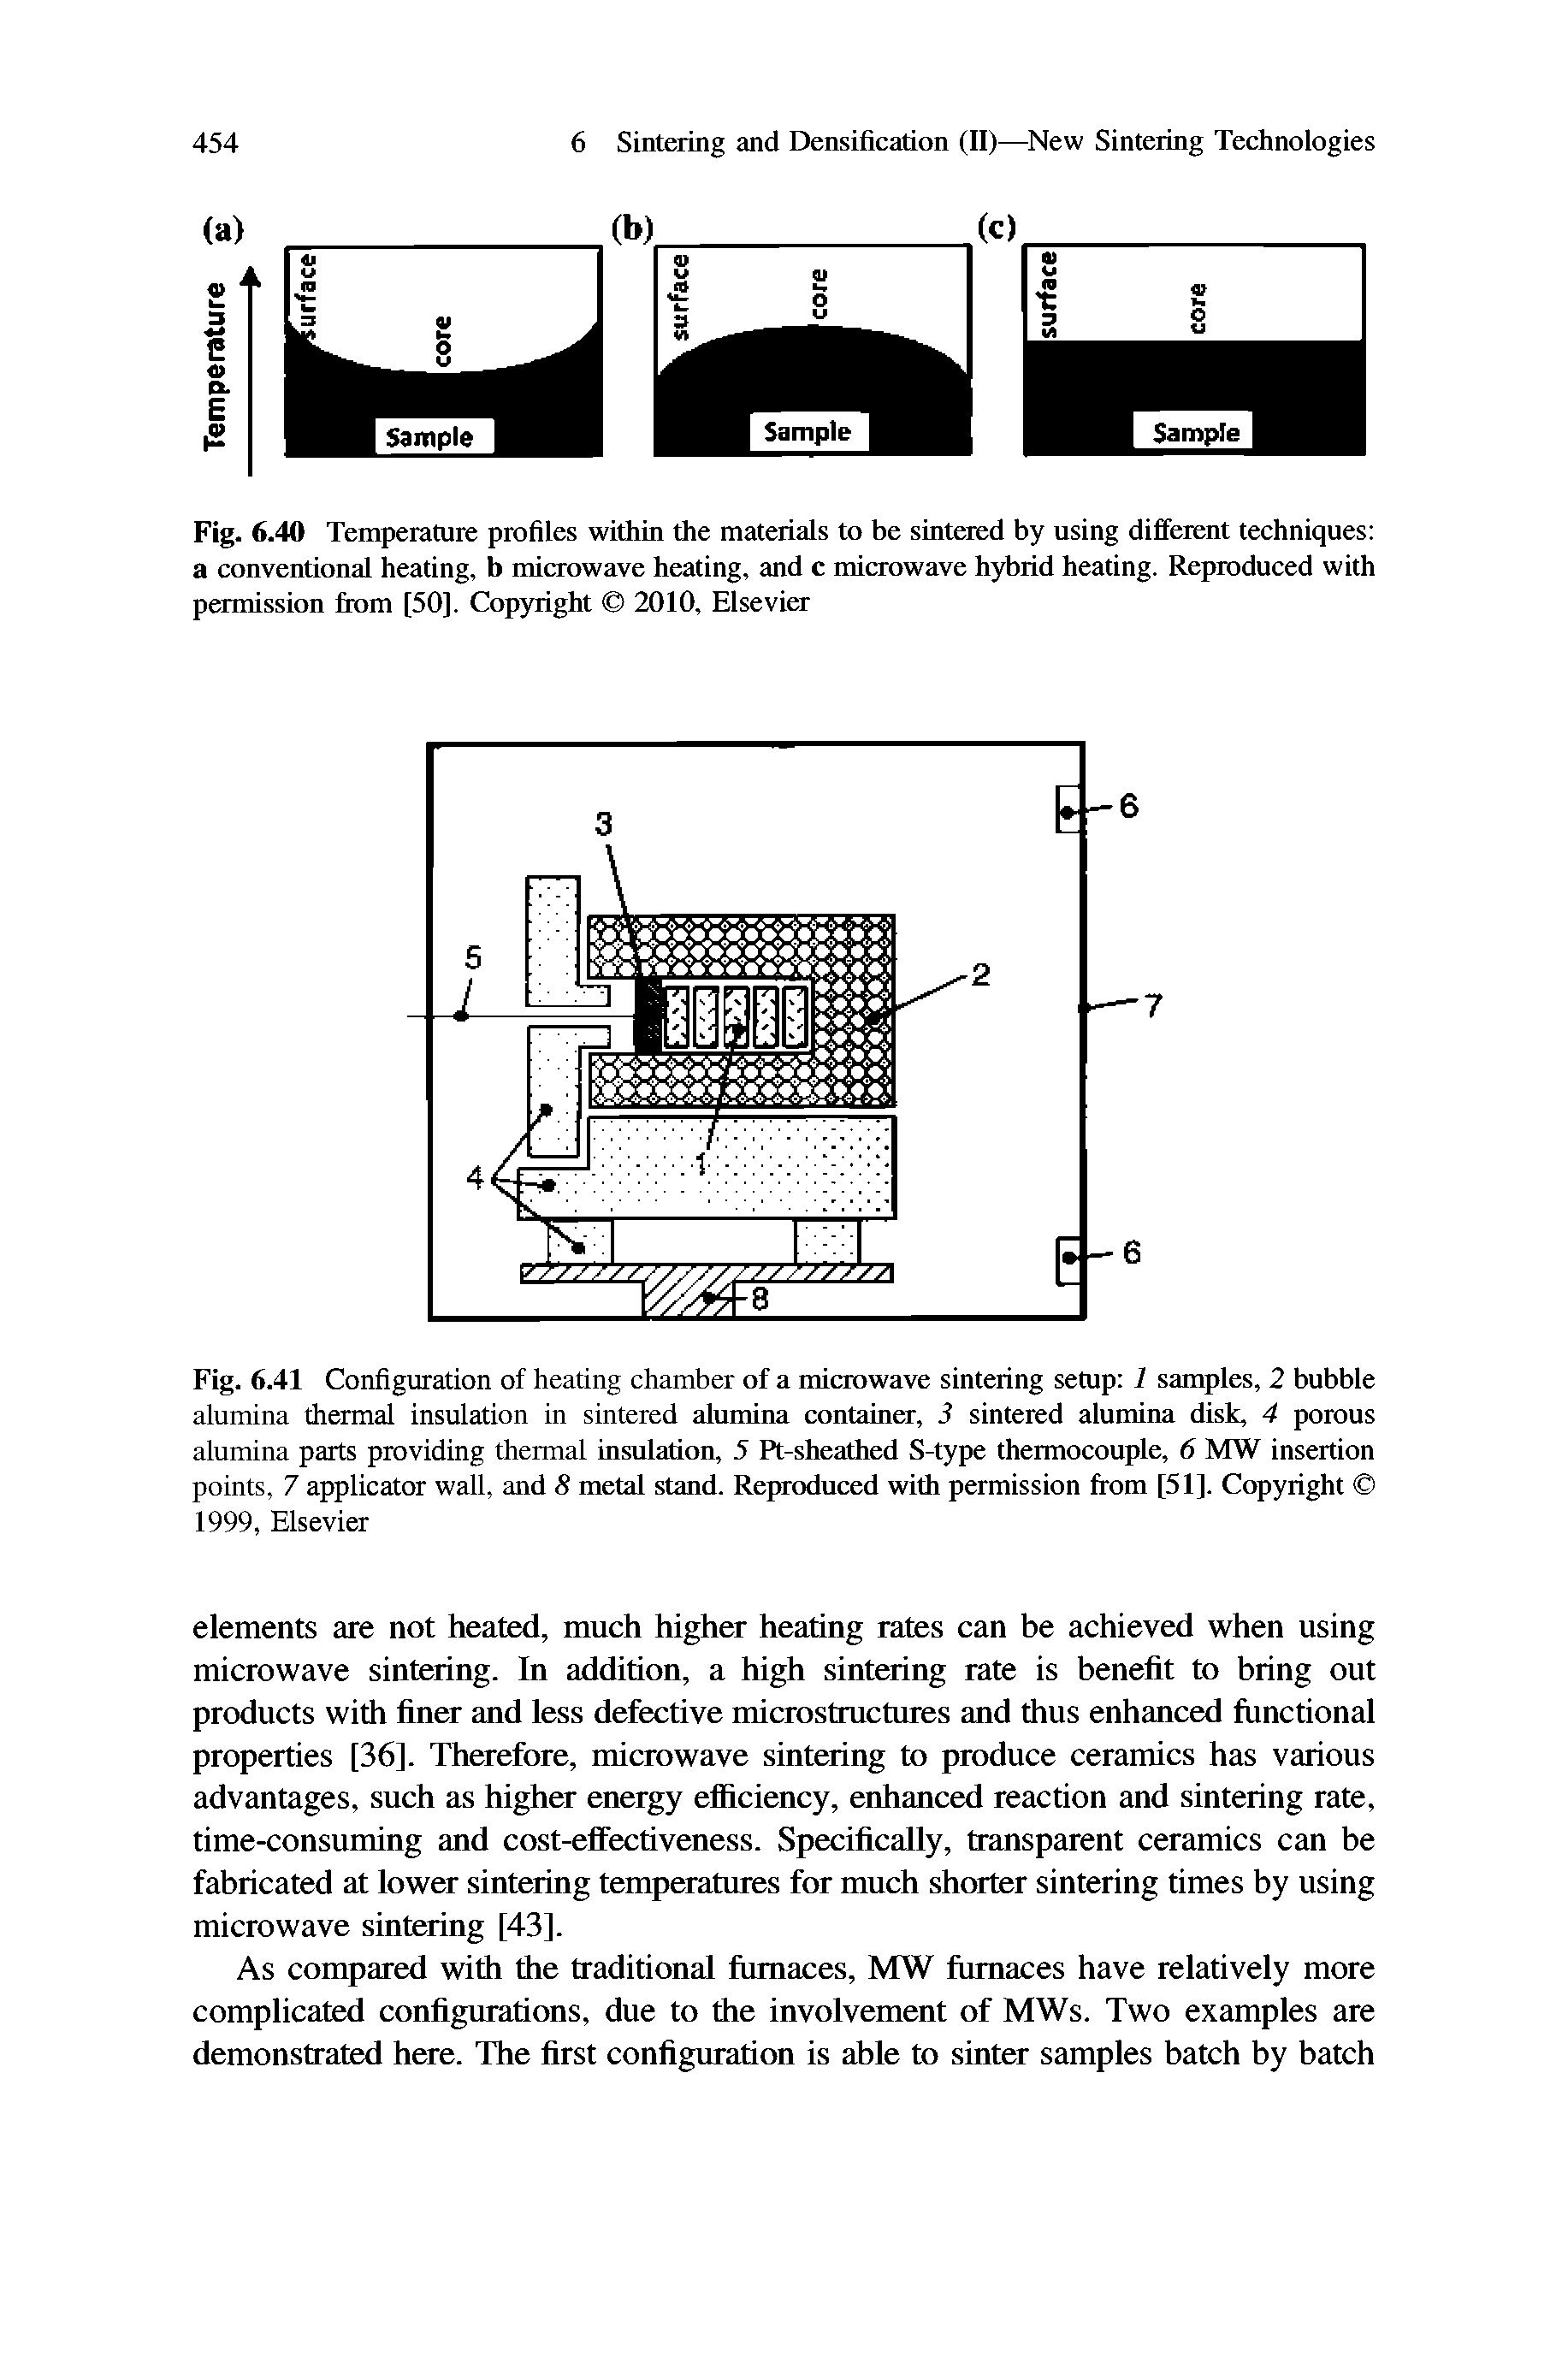 Fig. 6.41 Configuration of heating chamber of a microwave sintering setup I samples, 2 bubble alumina thermal insulation in sintered alumina containta-, 3 sintered alumina disk, 4 porous alumina parts providing thermal insulation, 5 Pt-sheathed S-type thermocouple, 6 MW insertion points, 7 applicator wall, and S metal stand. Re nxxluced with permission from [51]. Copyright 1999, Elsevier...